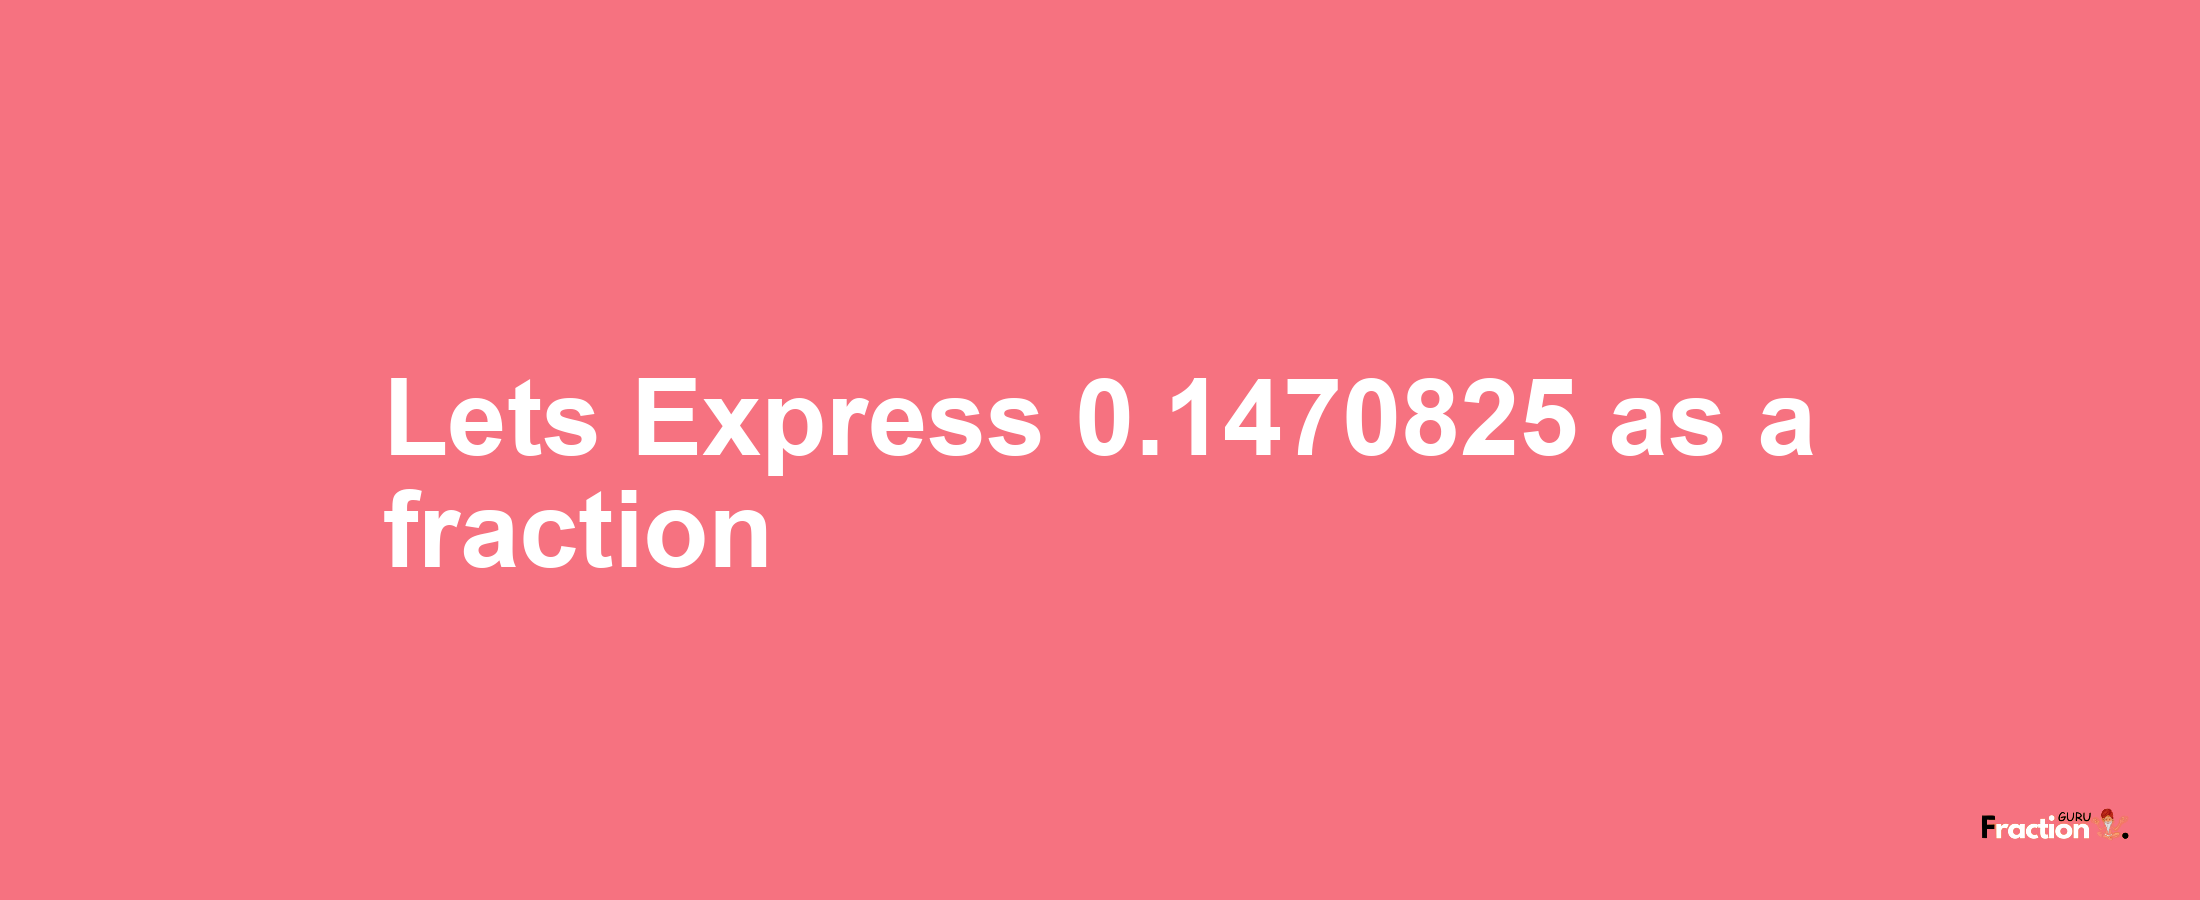 Lets Express 0.1470825 as afraction